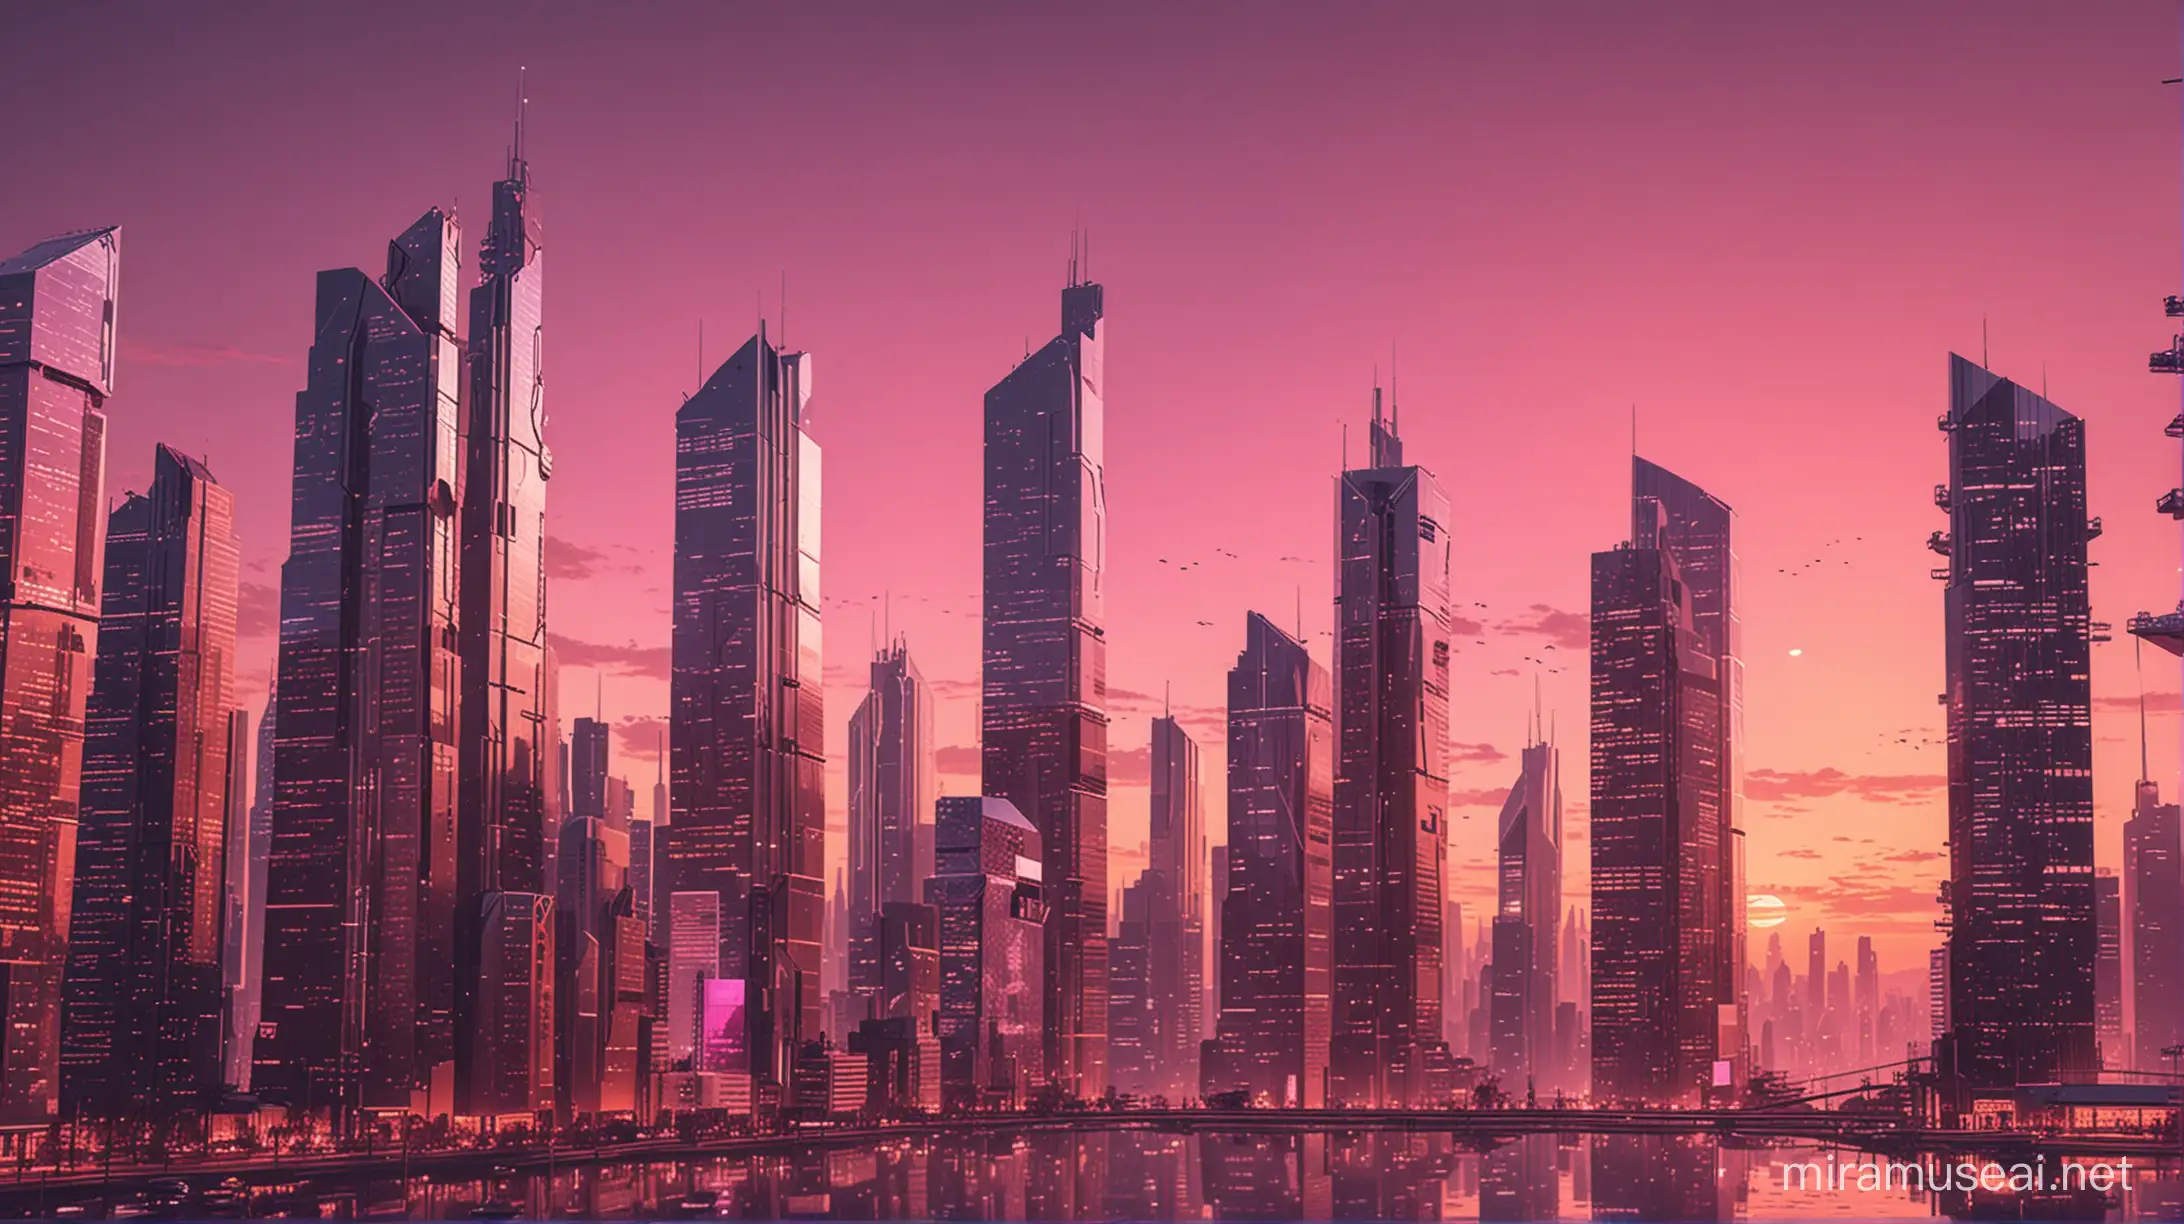 Imagine a sleek, futuristic cityscape at pinkish sunset with towering skyscrapers made entirely of digital assets. Think code blocks, gears, and charts forming the buildings.